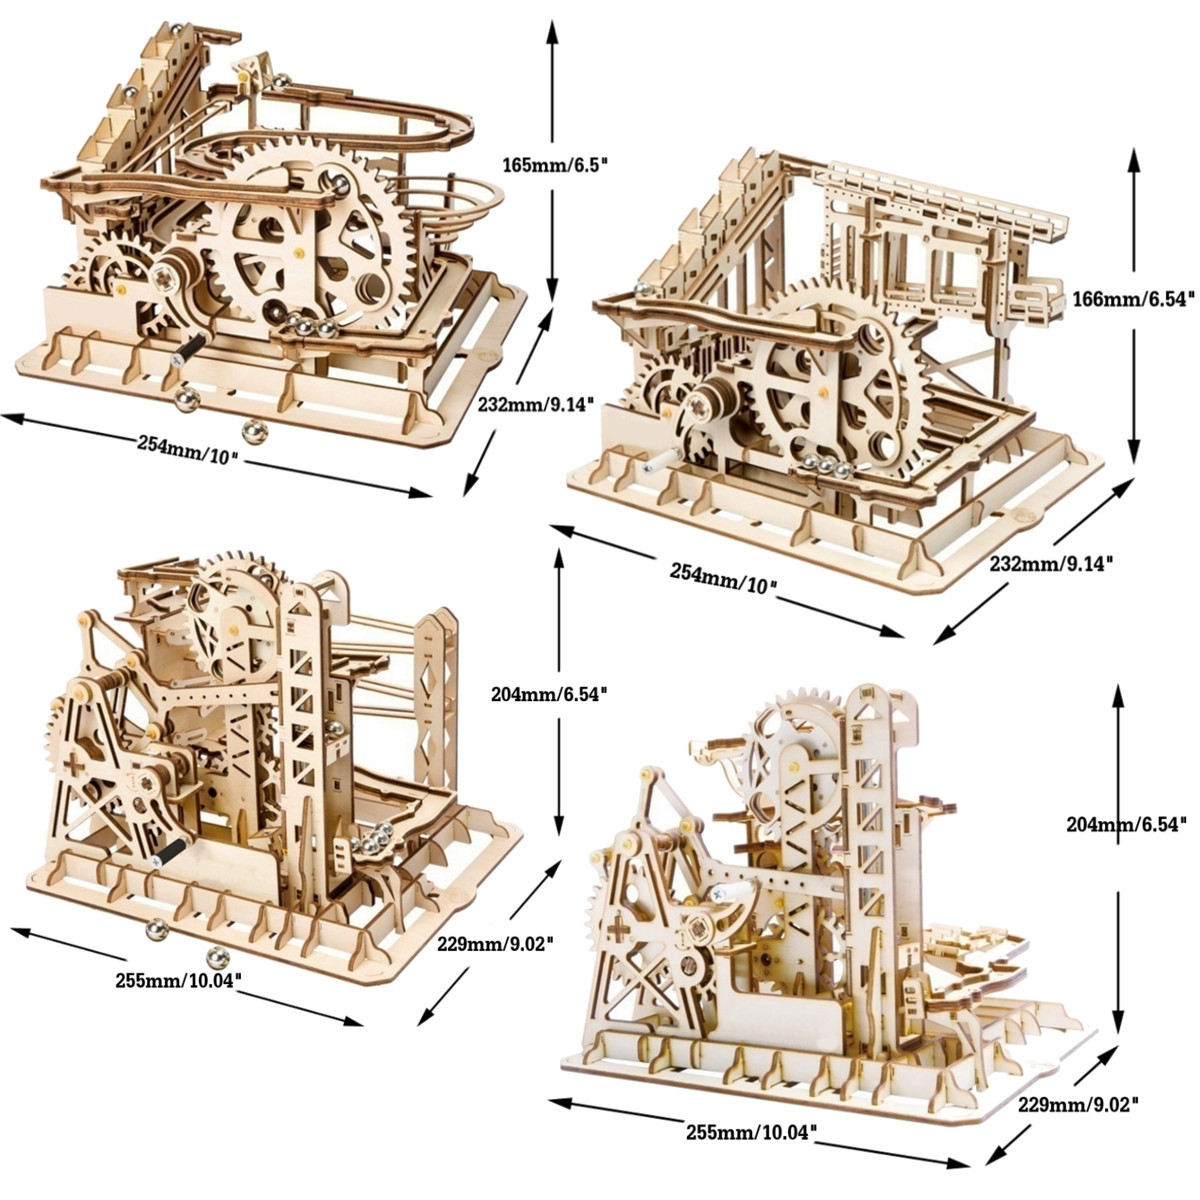 Robotime-4-Kinds-Hand-Crank-Marble-Run-Game-DIY-Coaster-Wooden-Model-Building-Kits-Assembly-Toy-Gift-1698293-8